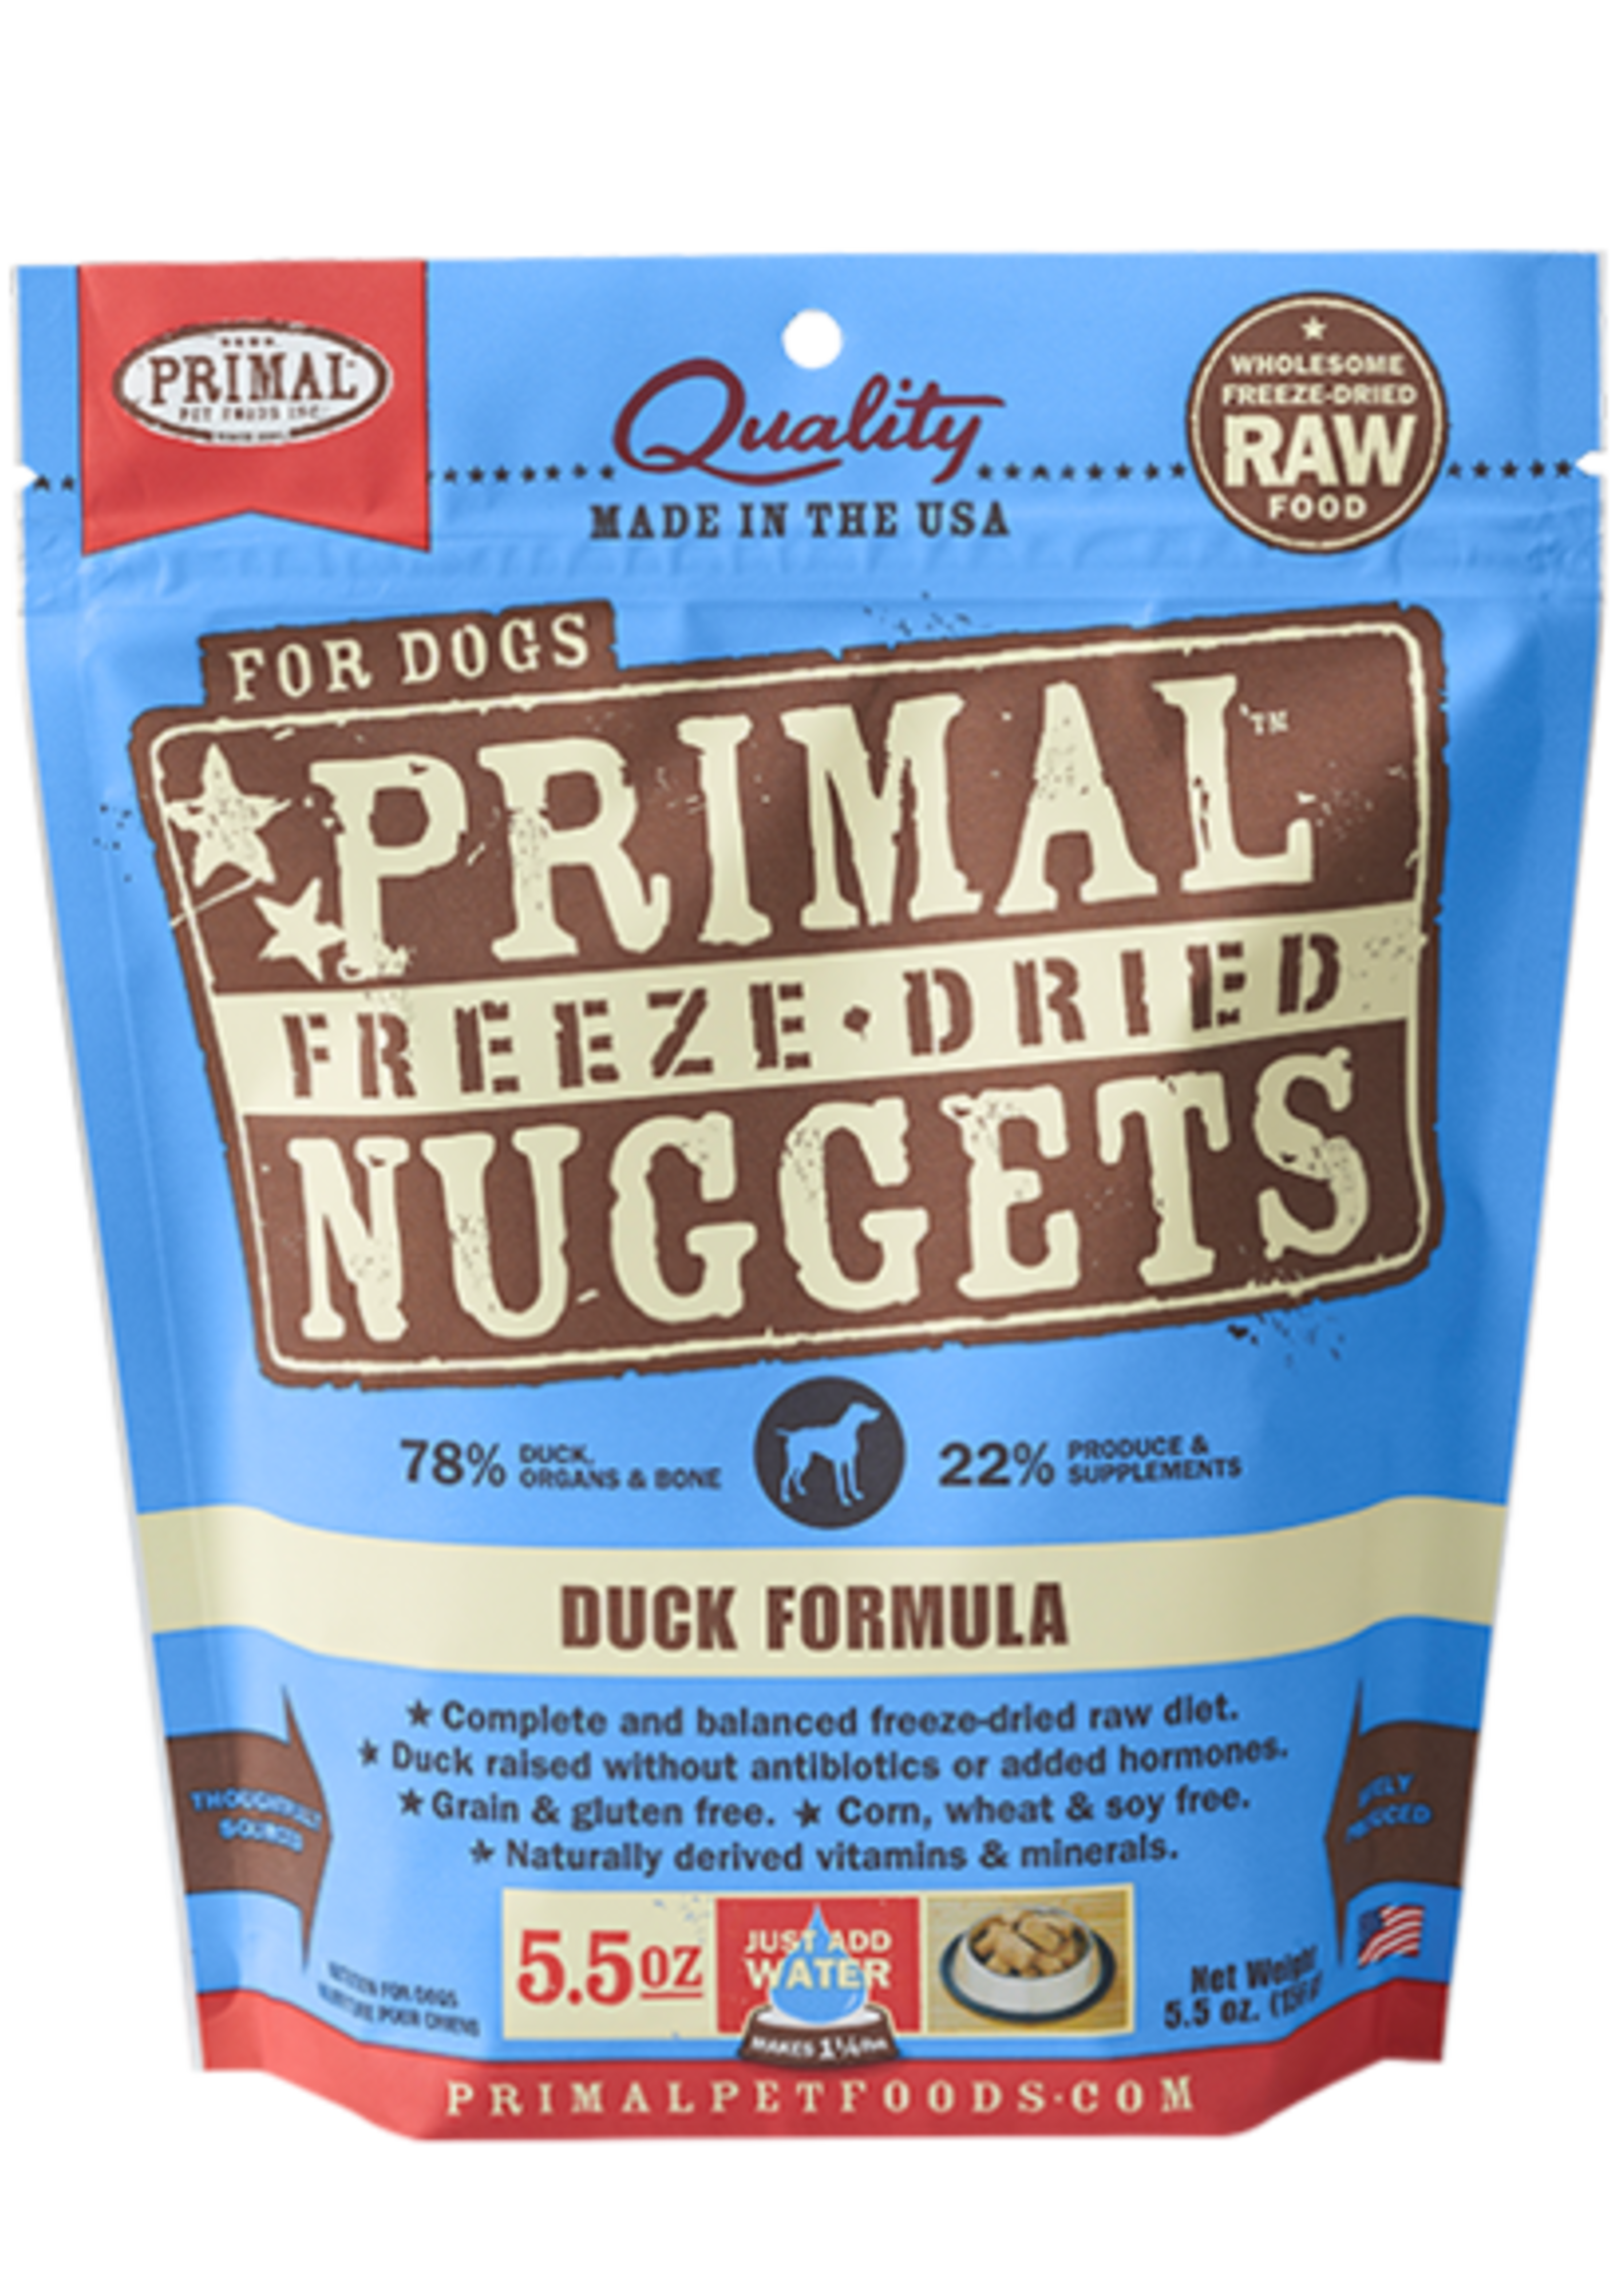 Primal Pet Foods Primal Canine Raw Freeze-Dried Nuggets Duck